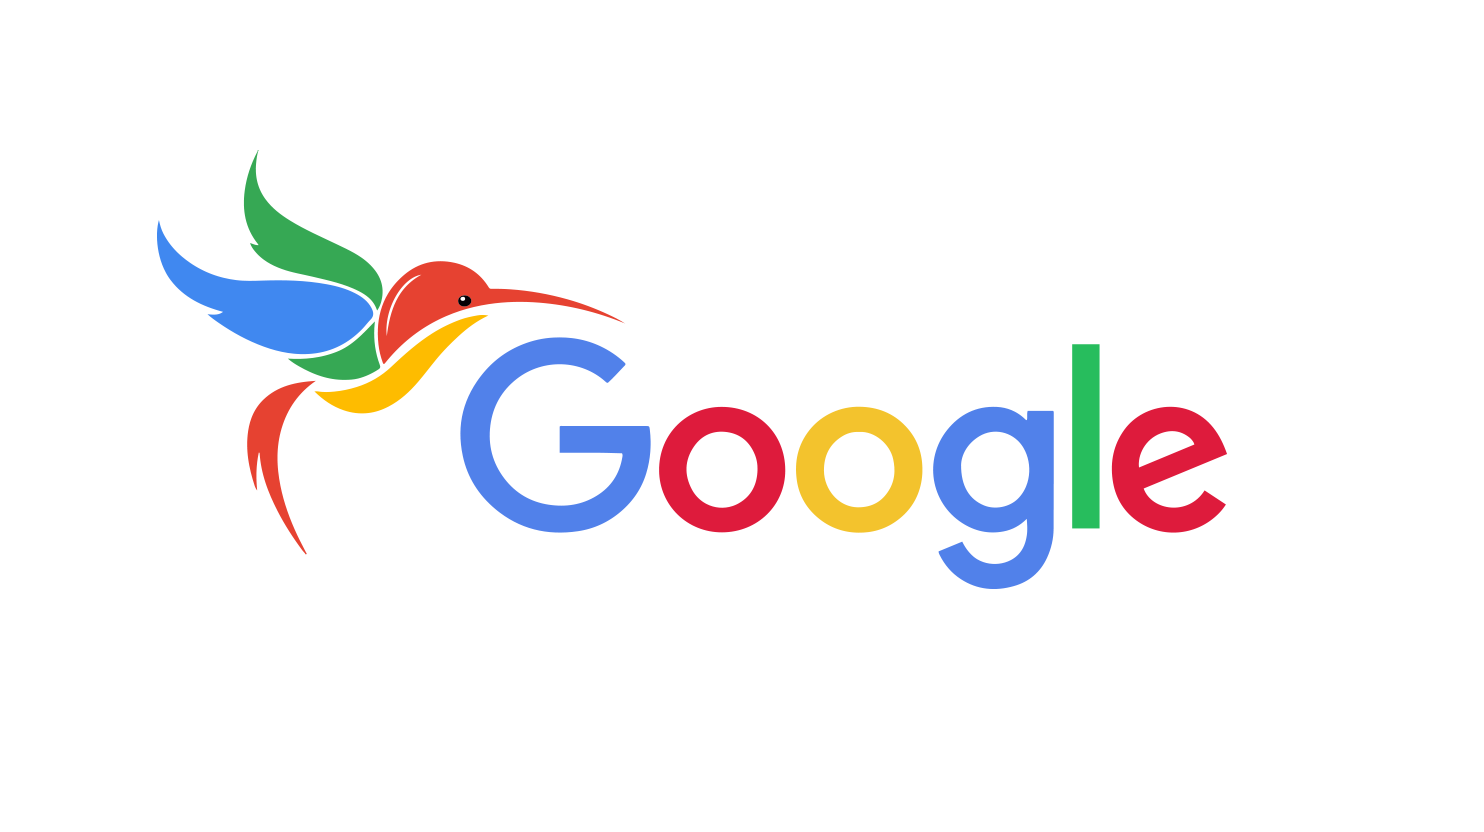 Google Logo with a colorful bird to its left